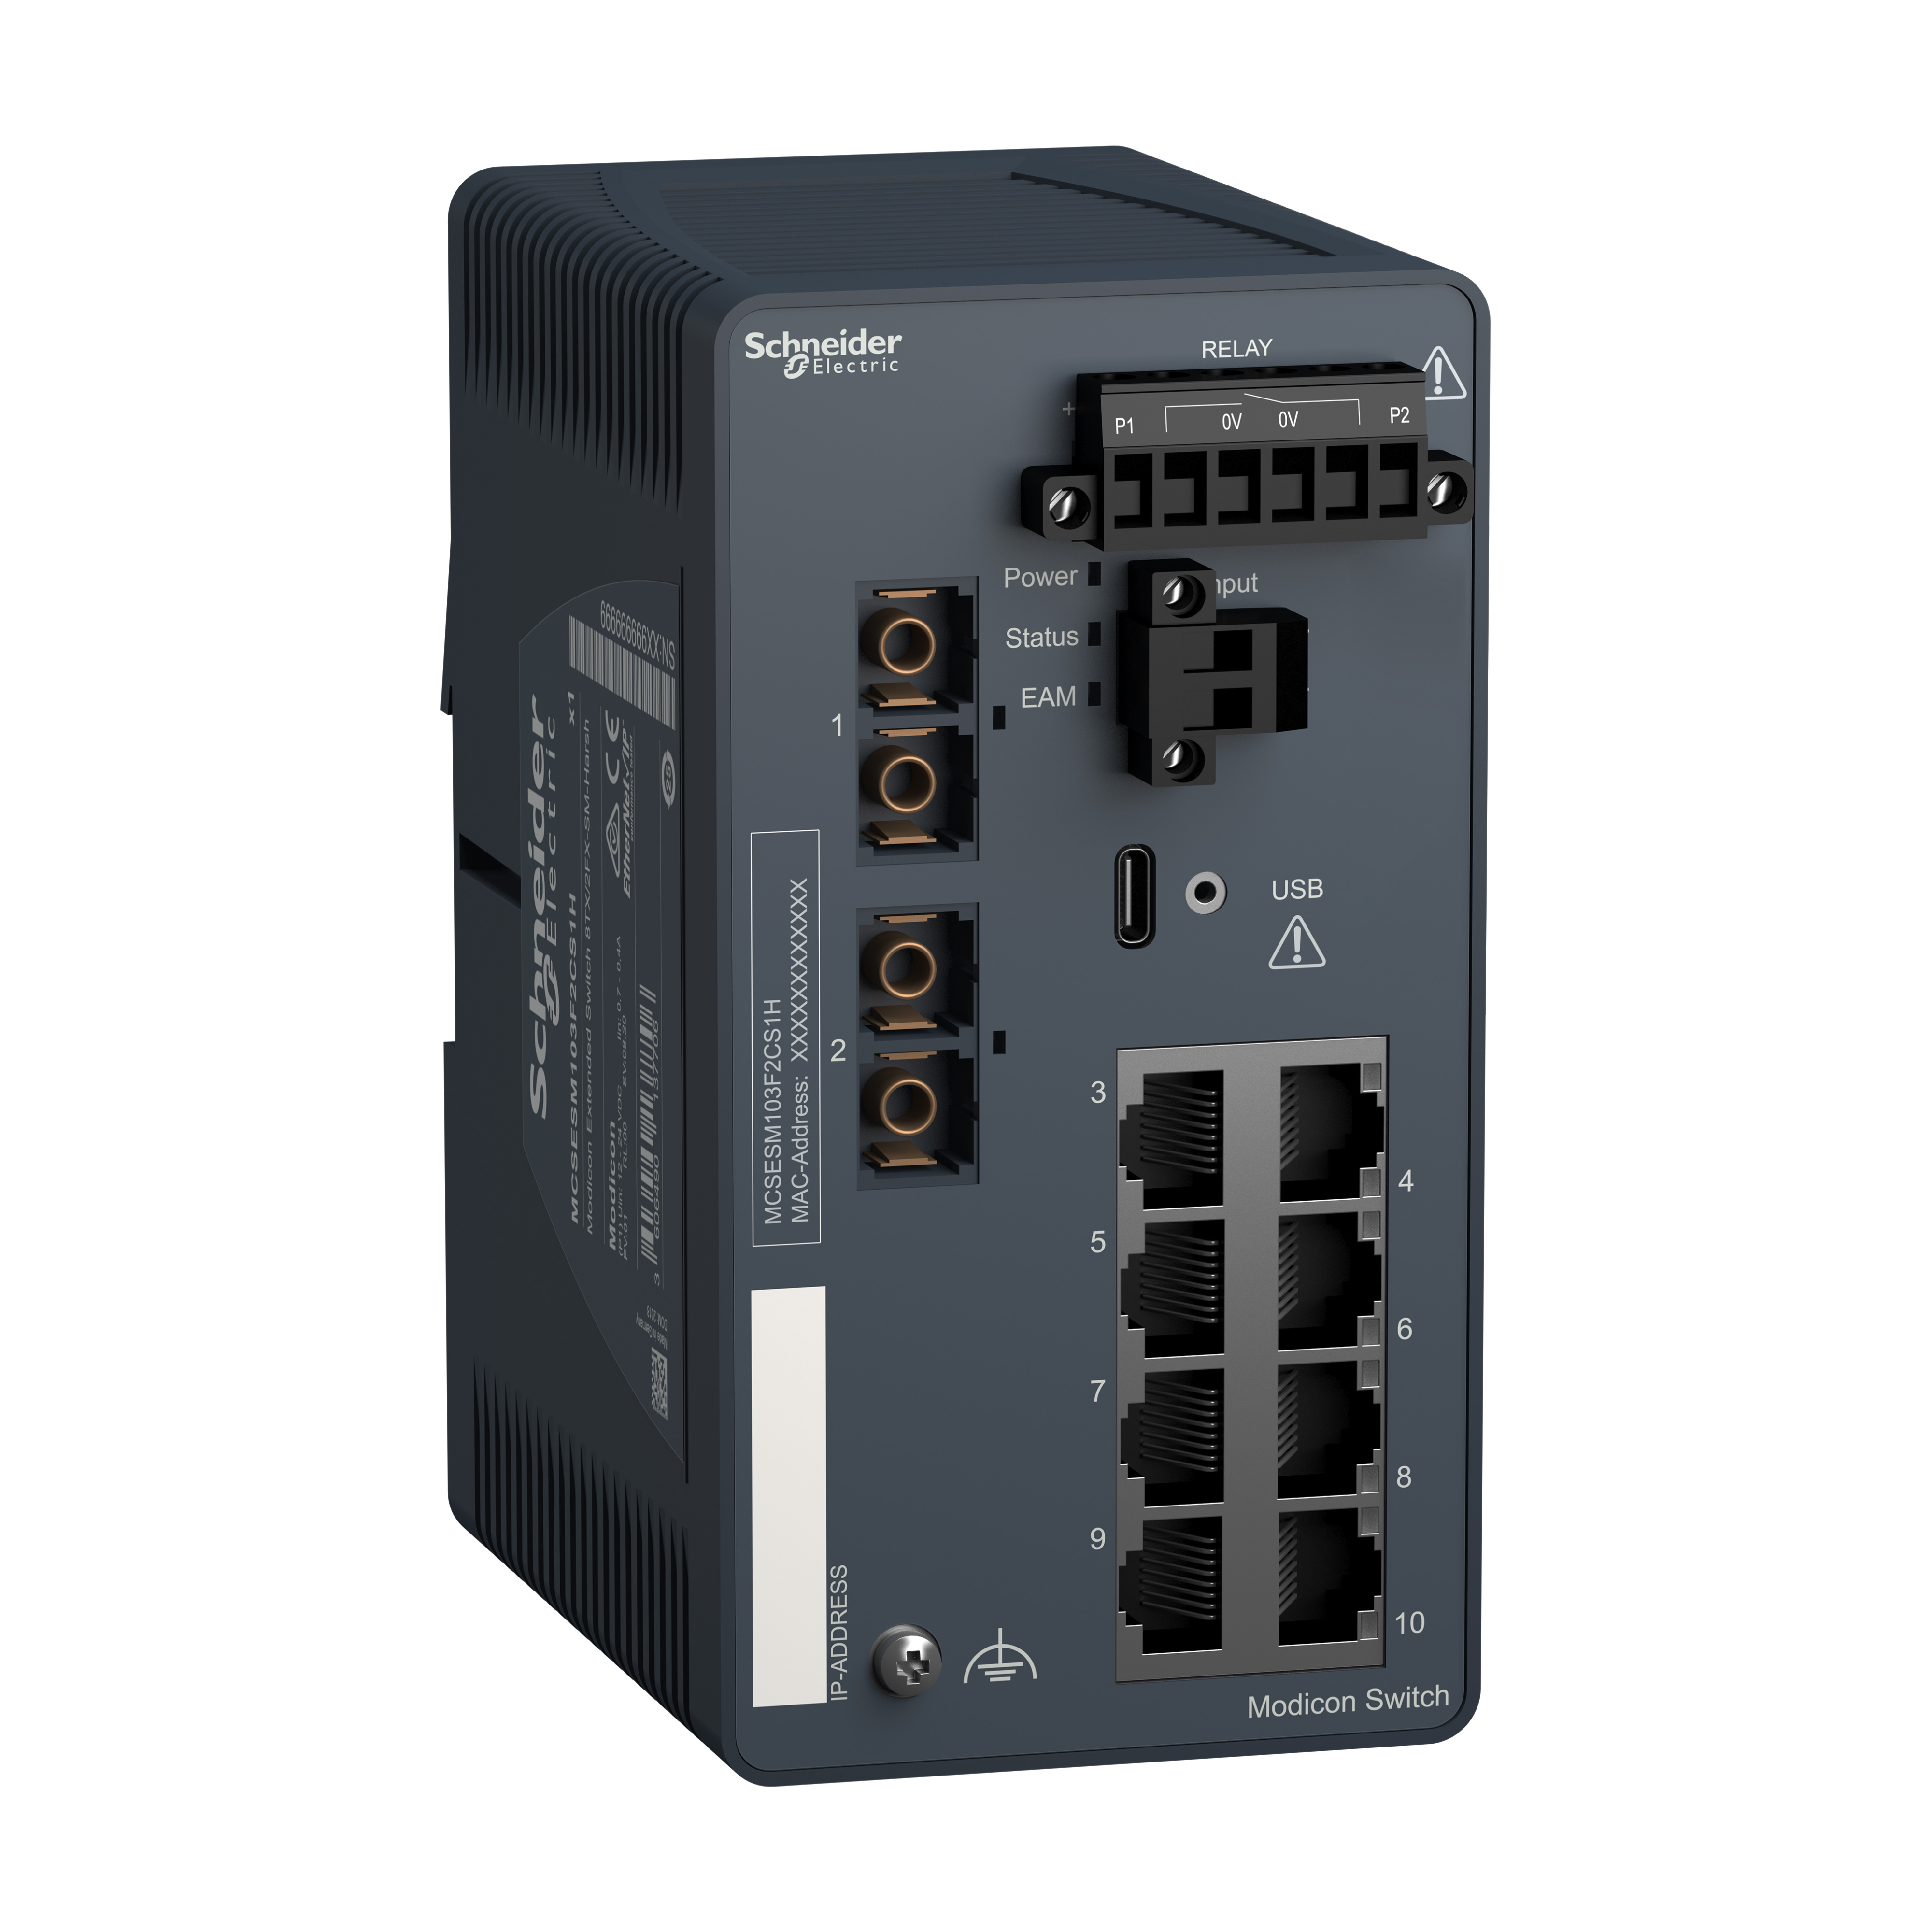 Modicon Extended Managed Switch - 8 ports for copper + 2 ports for fiber optic single-mode - Harsh